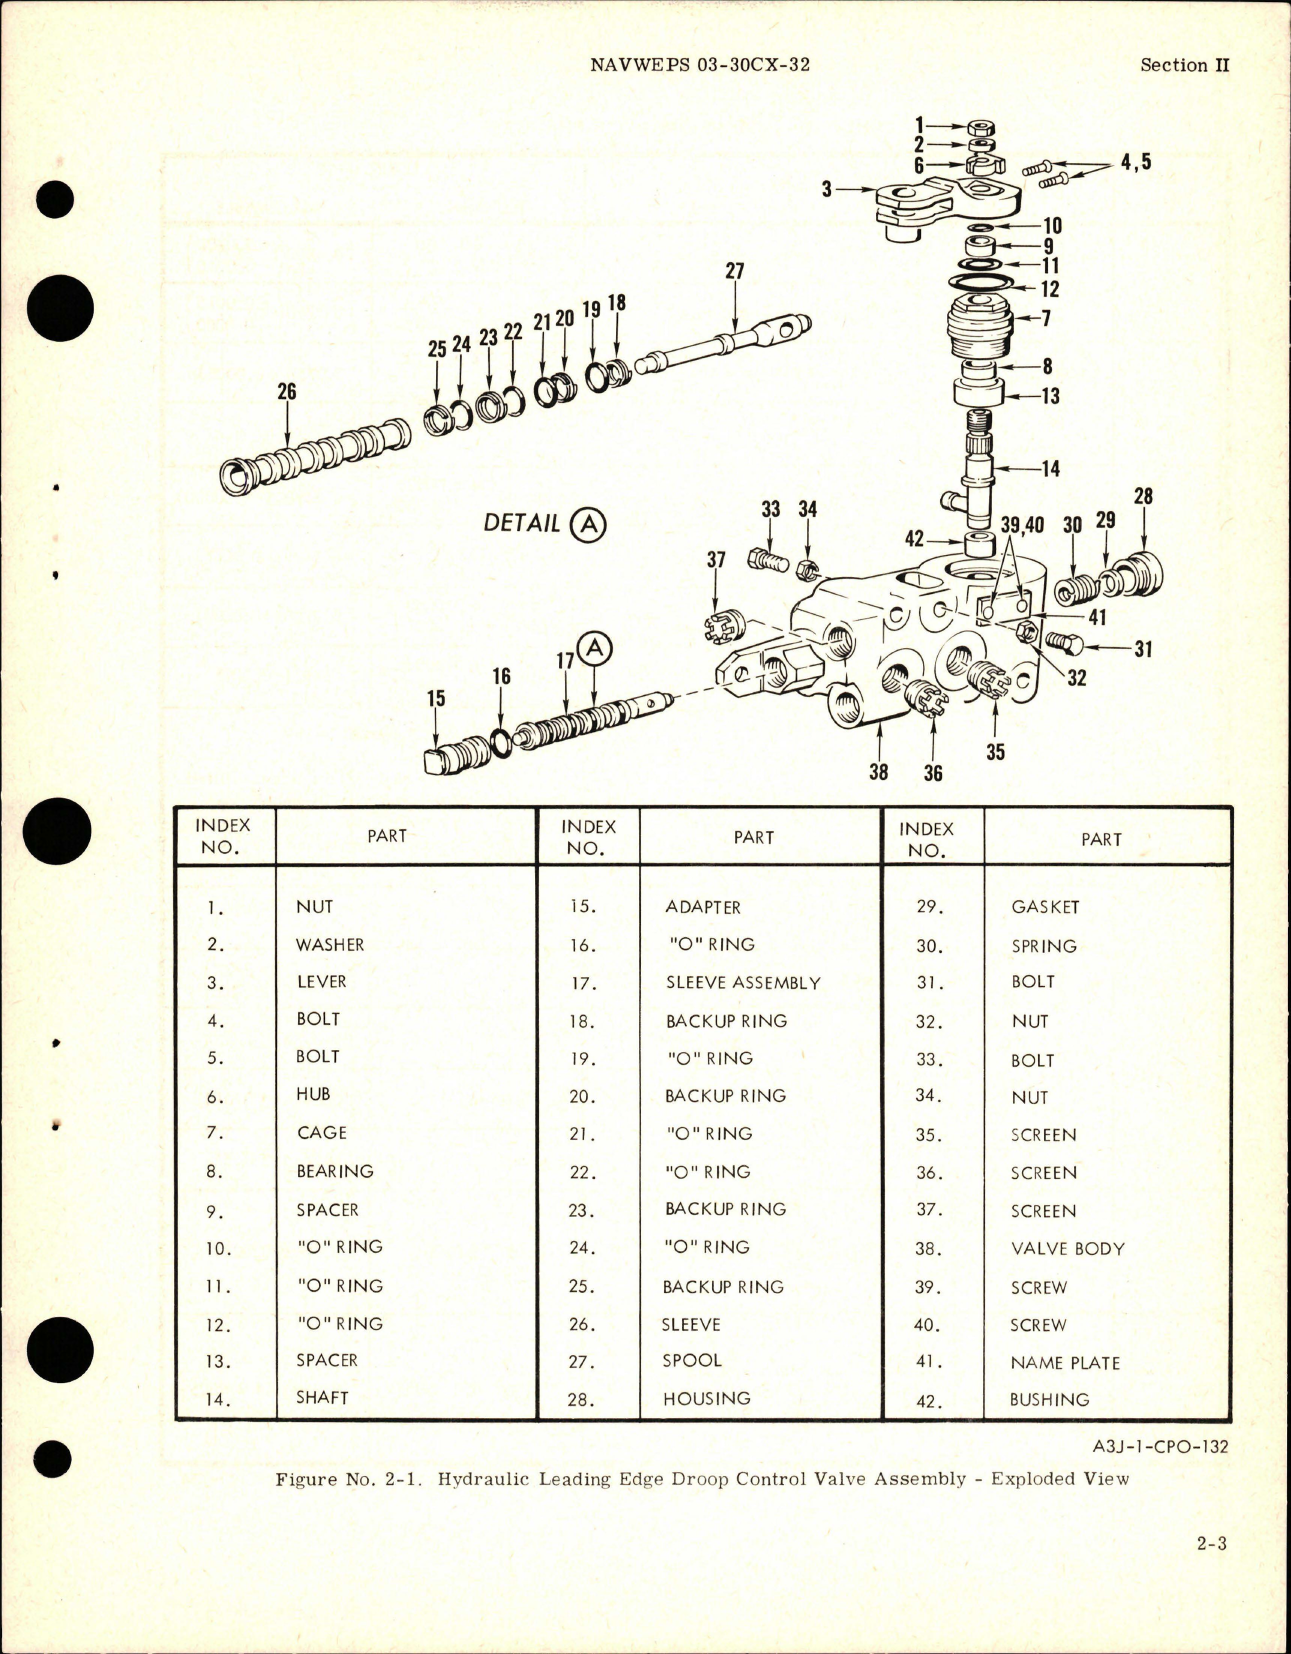 Sample page 7 from AirCorps Library document: Overhaul Instructions for Hydraulic Leading Edge Droop Control Valve Assembly